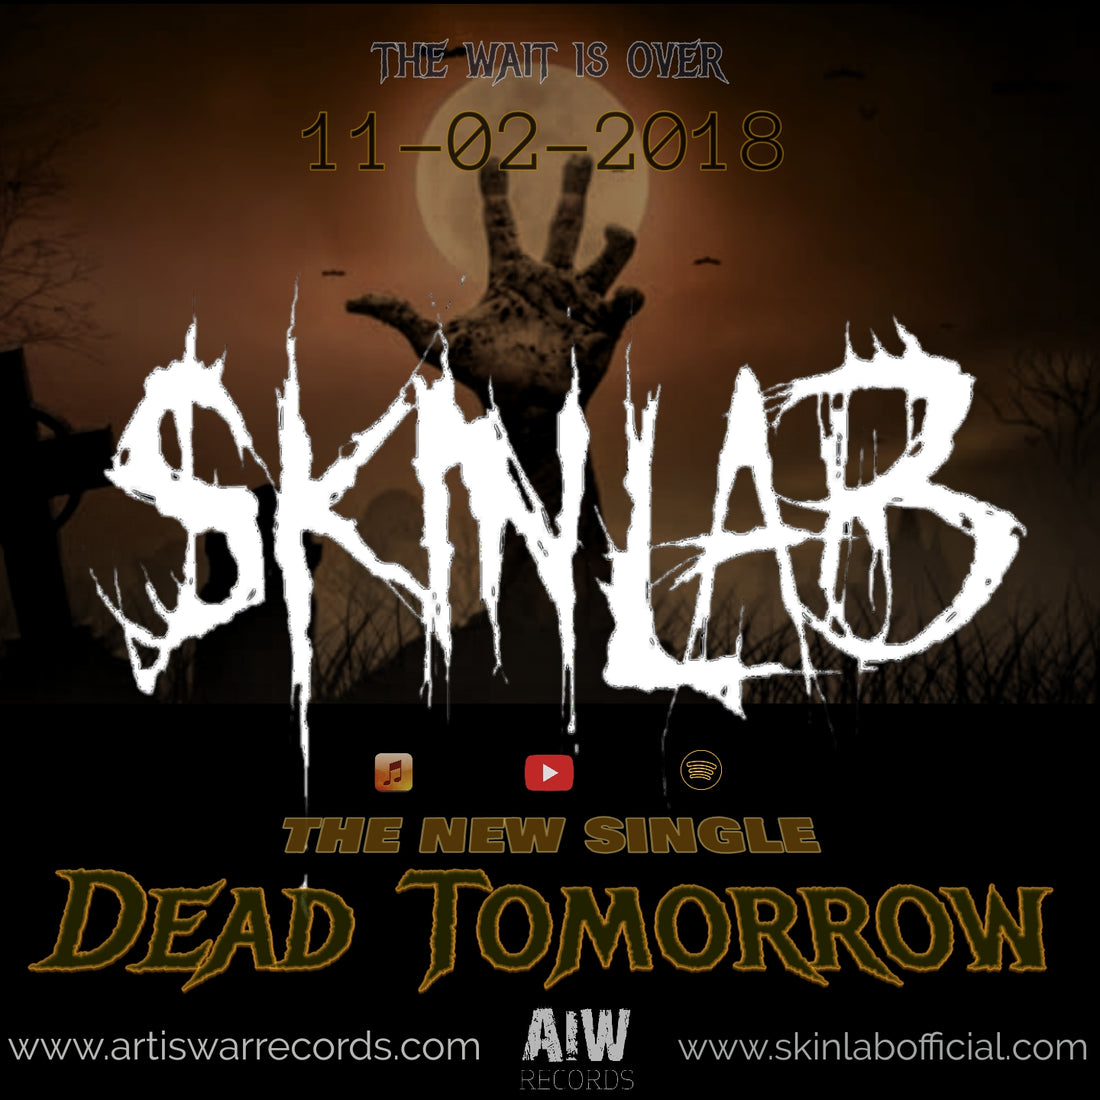 Dead tomorrow out now - official SKINLAB video AIW records